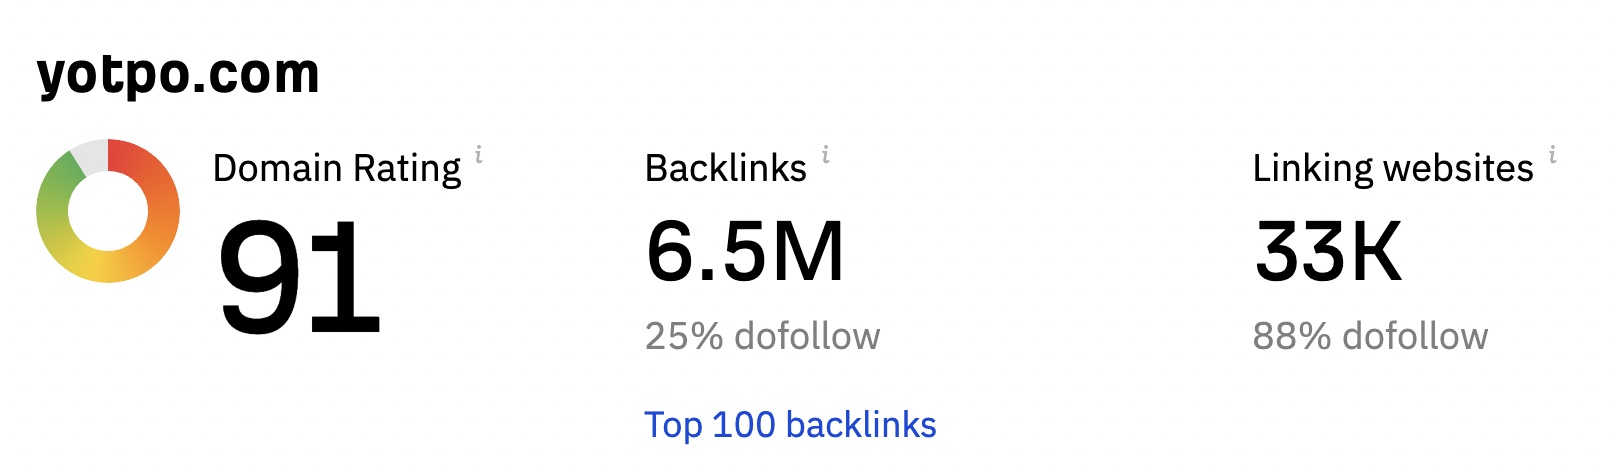 A screenshot showing the number of backlinks to yotpo.com